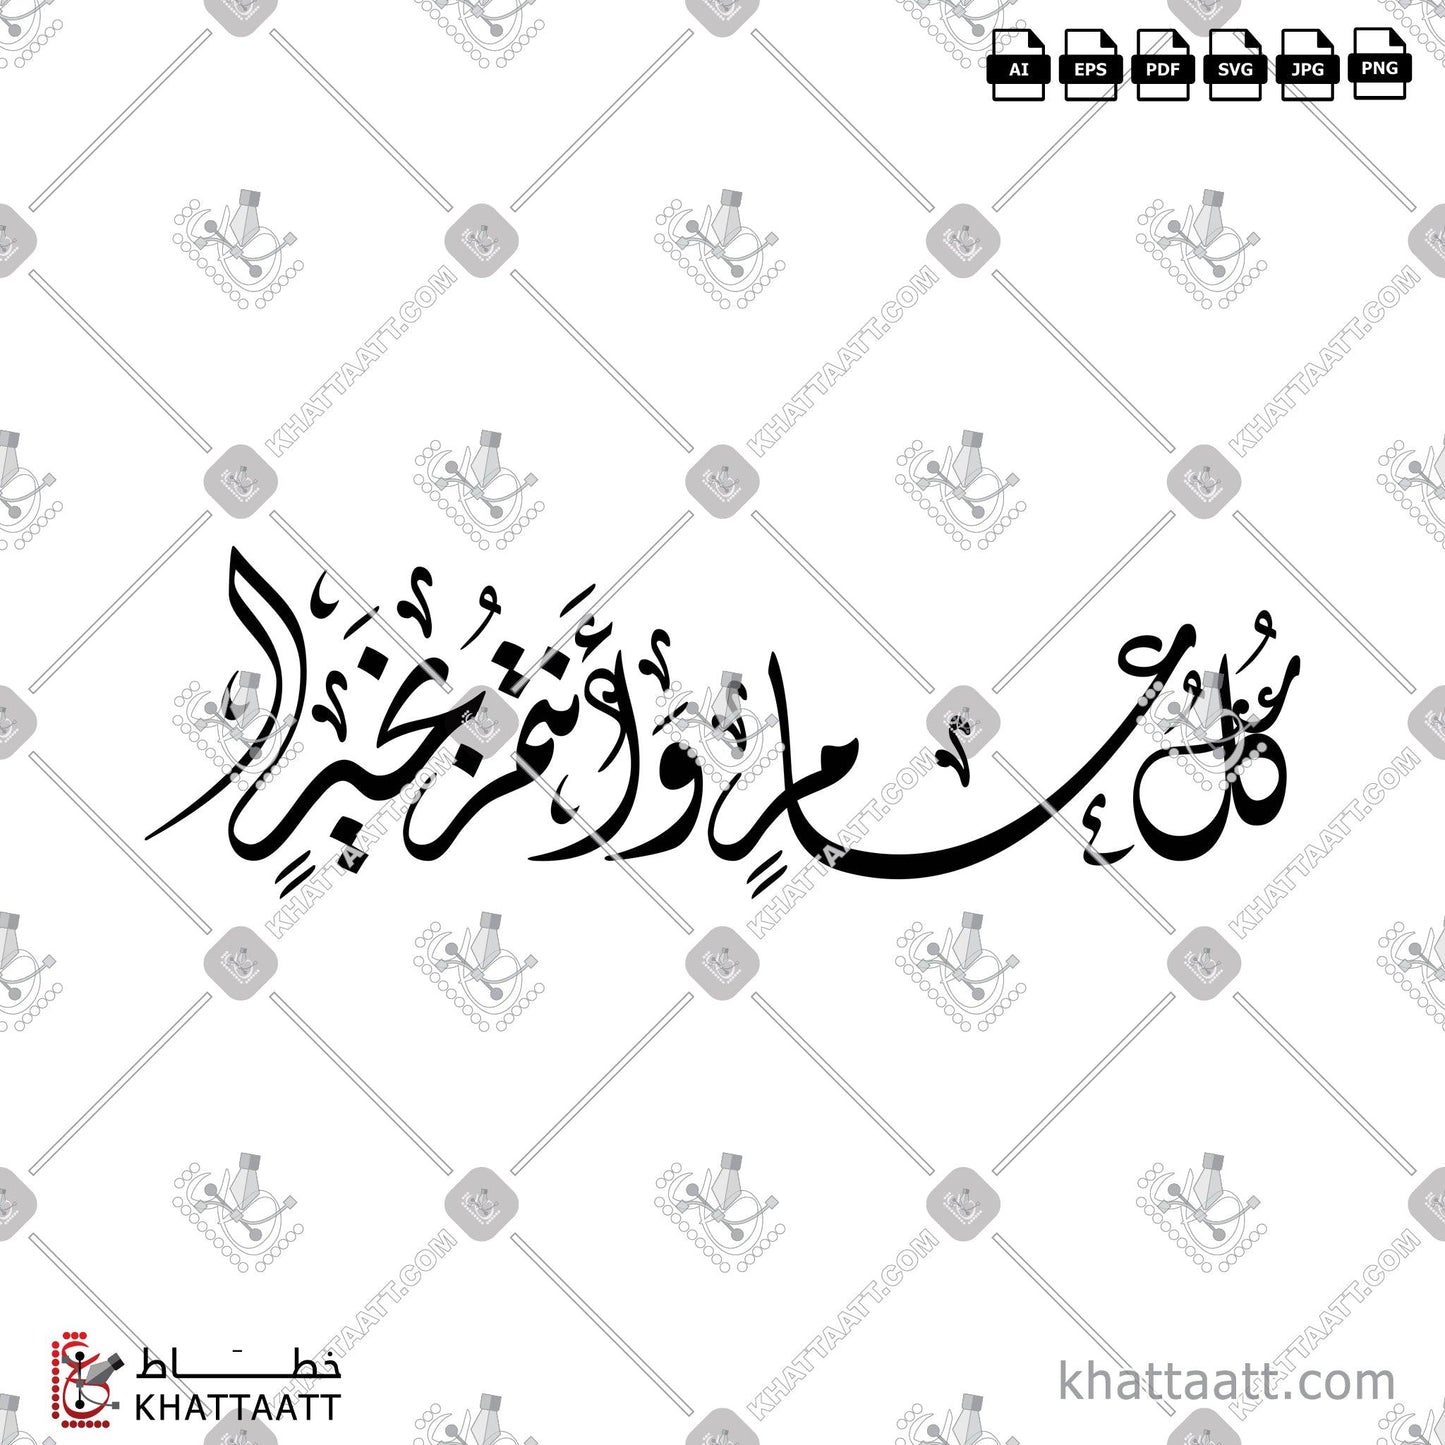 Download Arabic Calligraphy of كل عام وأنتم بخير in Diwani - الخط الديواني in vector and .png